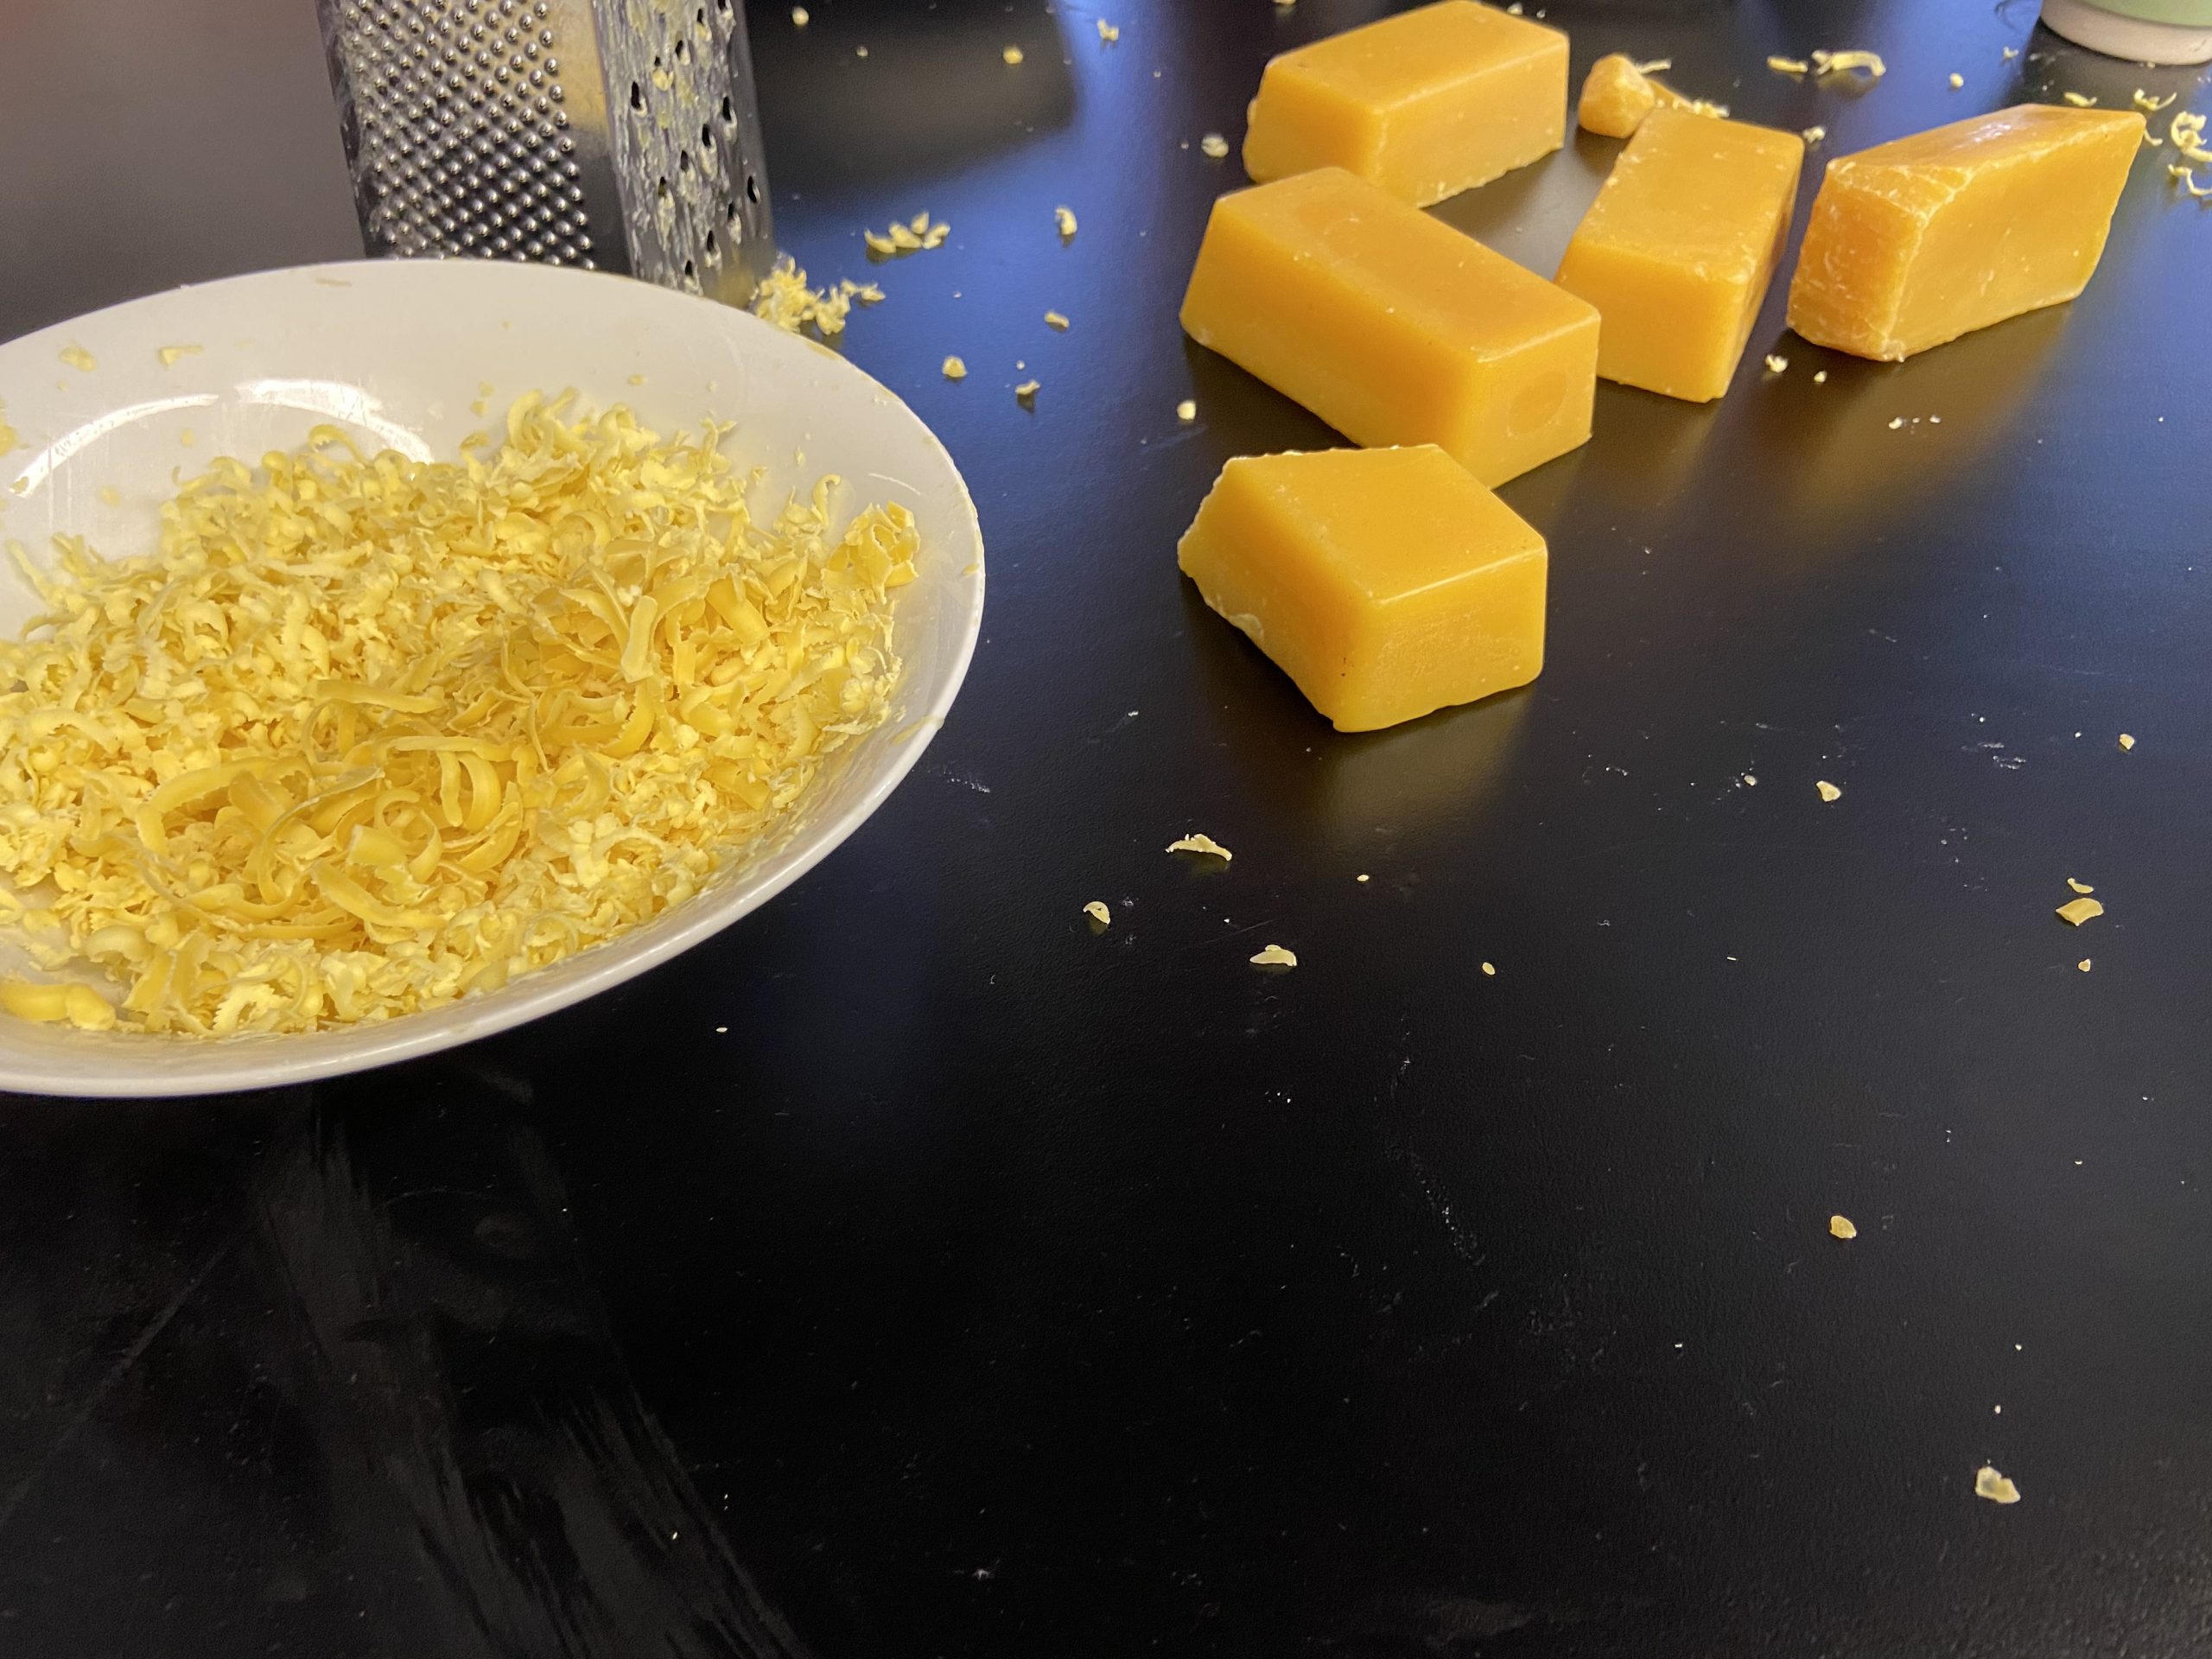 Beeswax blocks and grated beeswax in a bowl